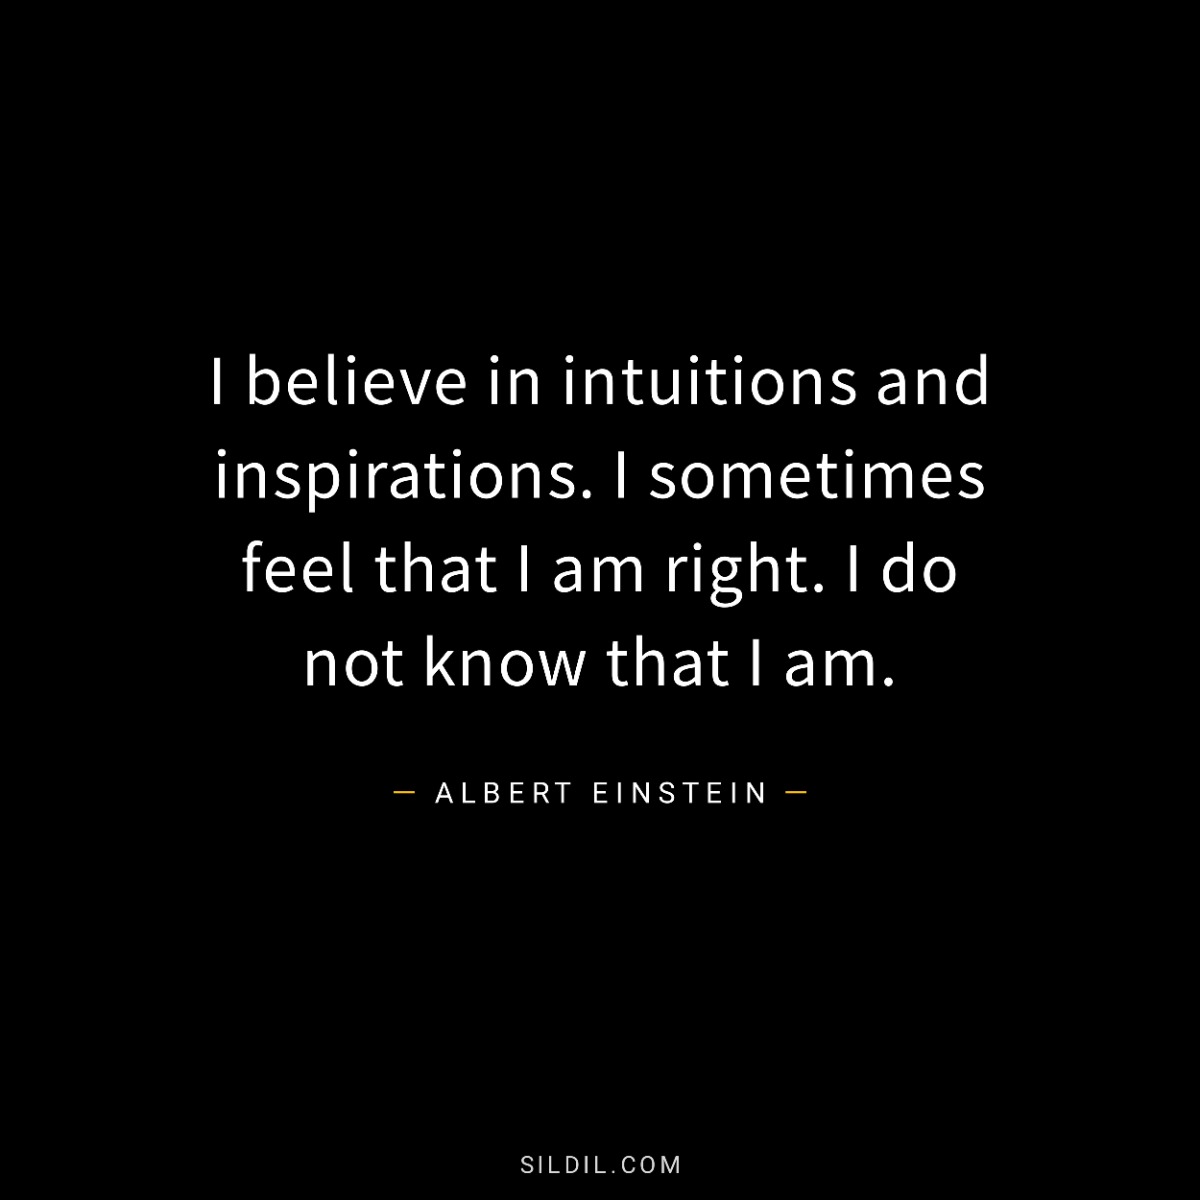 I believe in intuitions and inspirations. I sometimes feel that I am right. I do not know that I am.